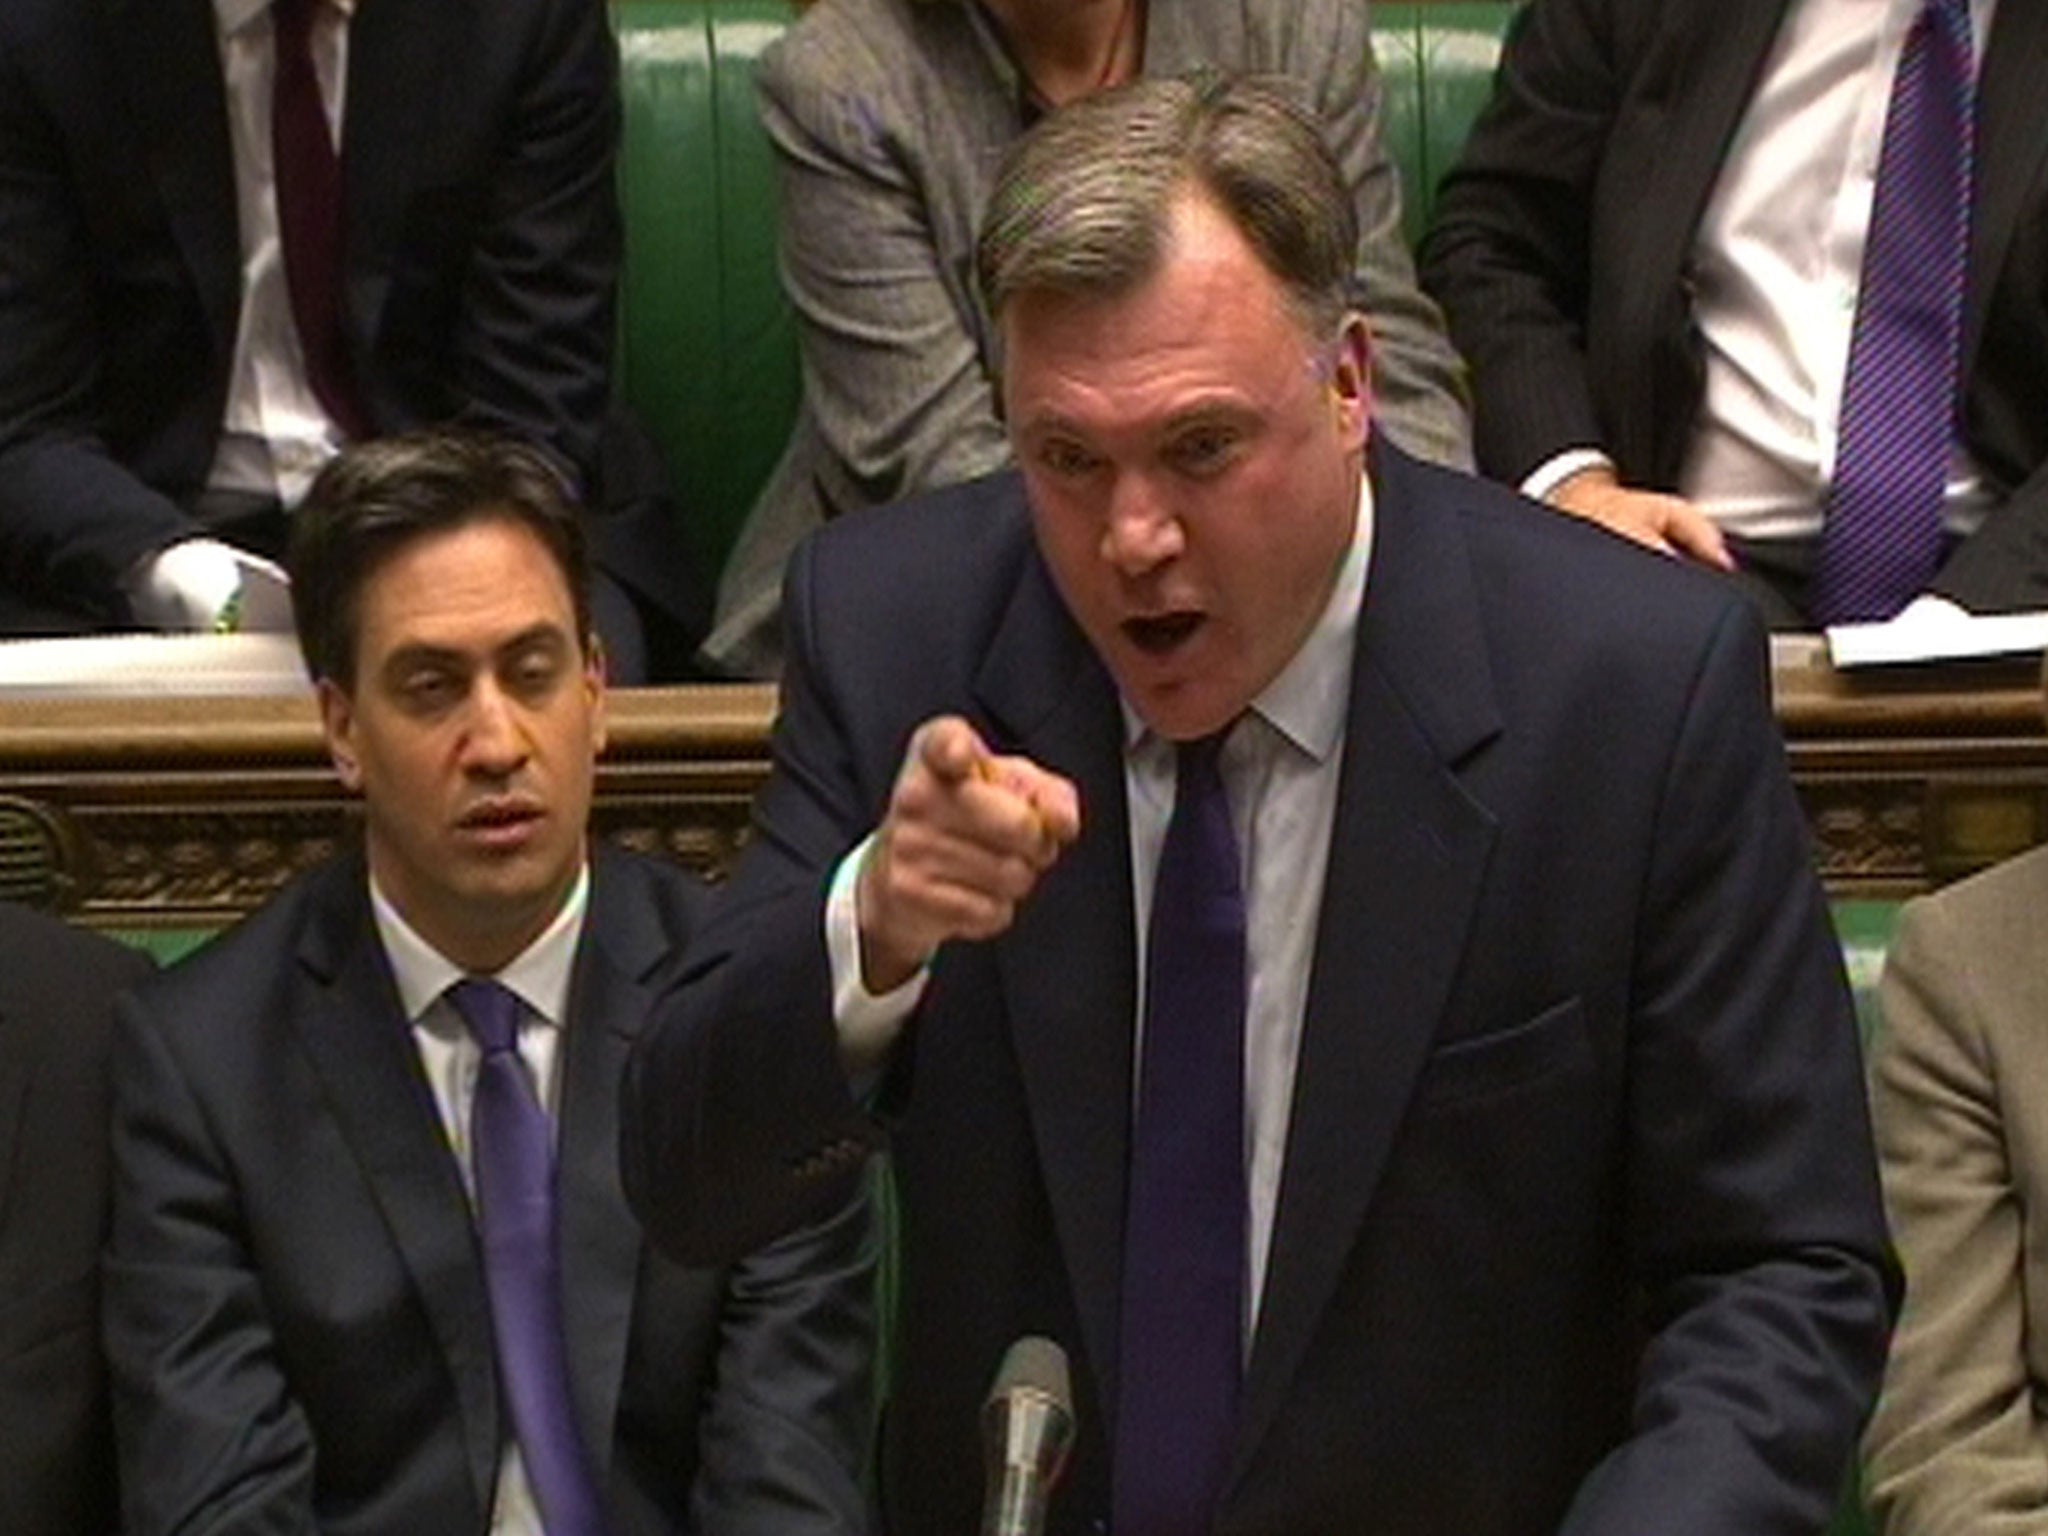 Ed Balls faced sustained heckling from the Tory back benches during his response to George Osborne's Autumn Statement